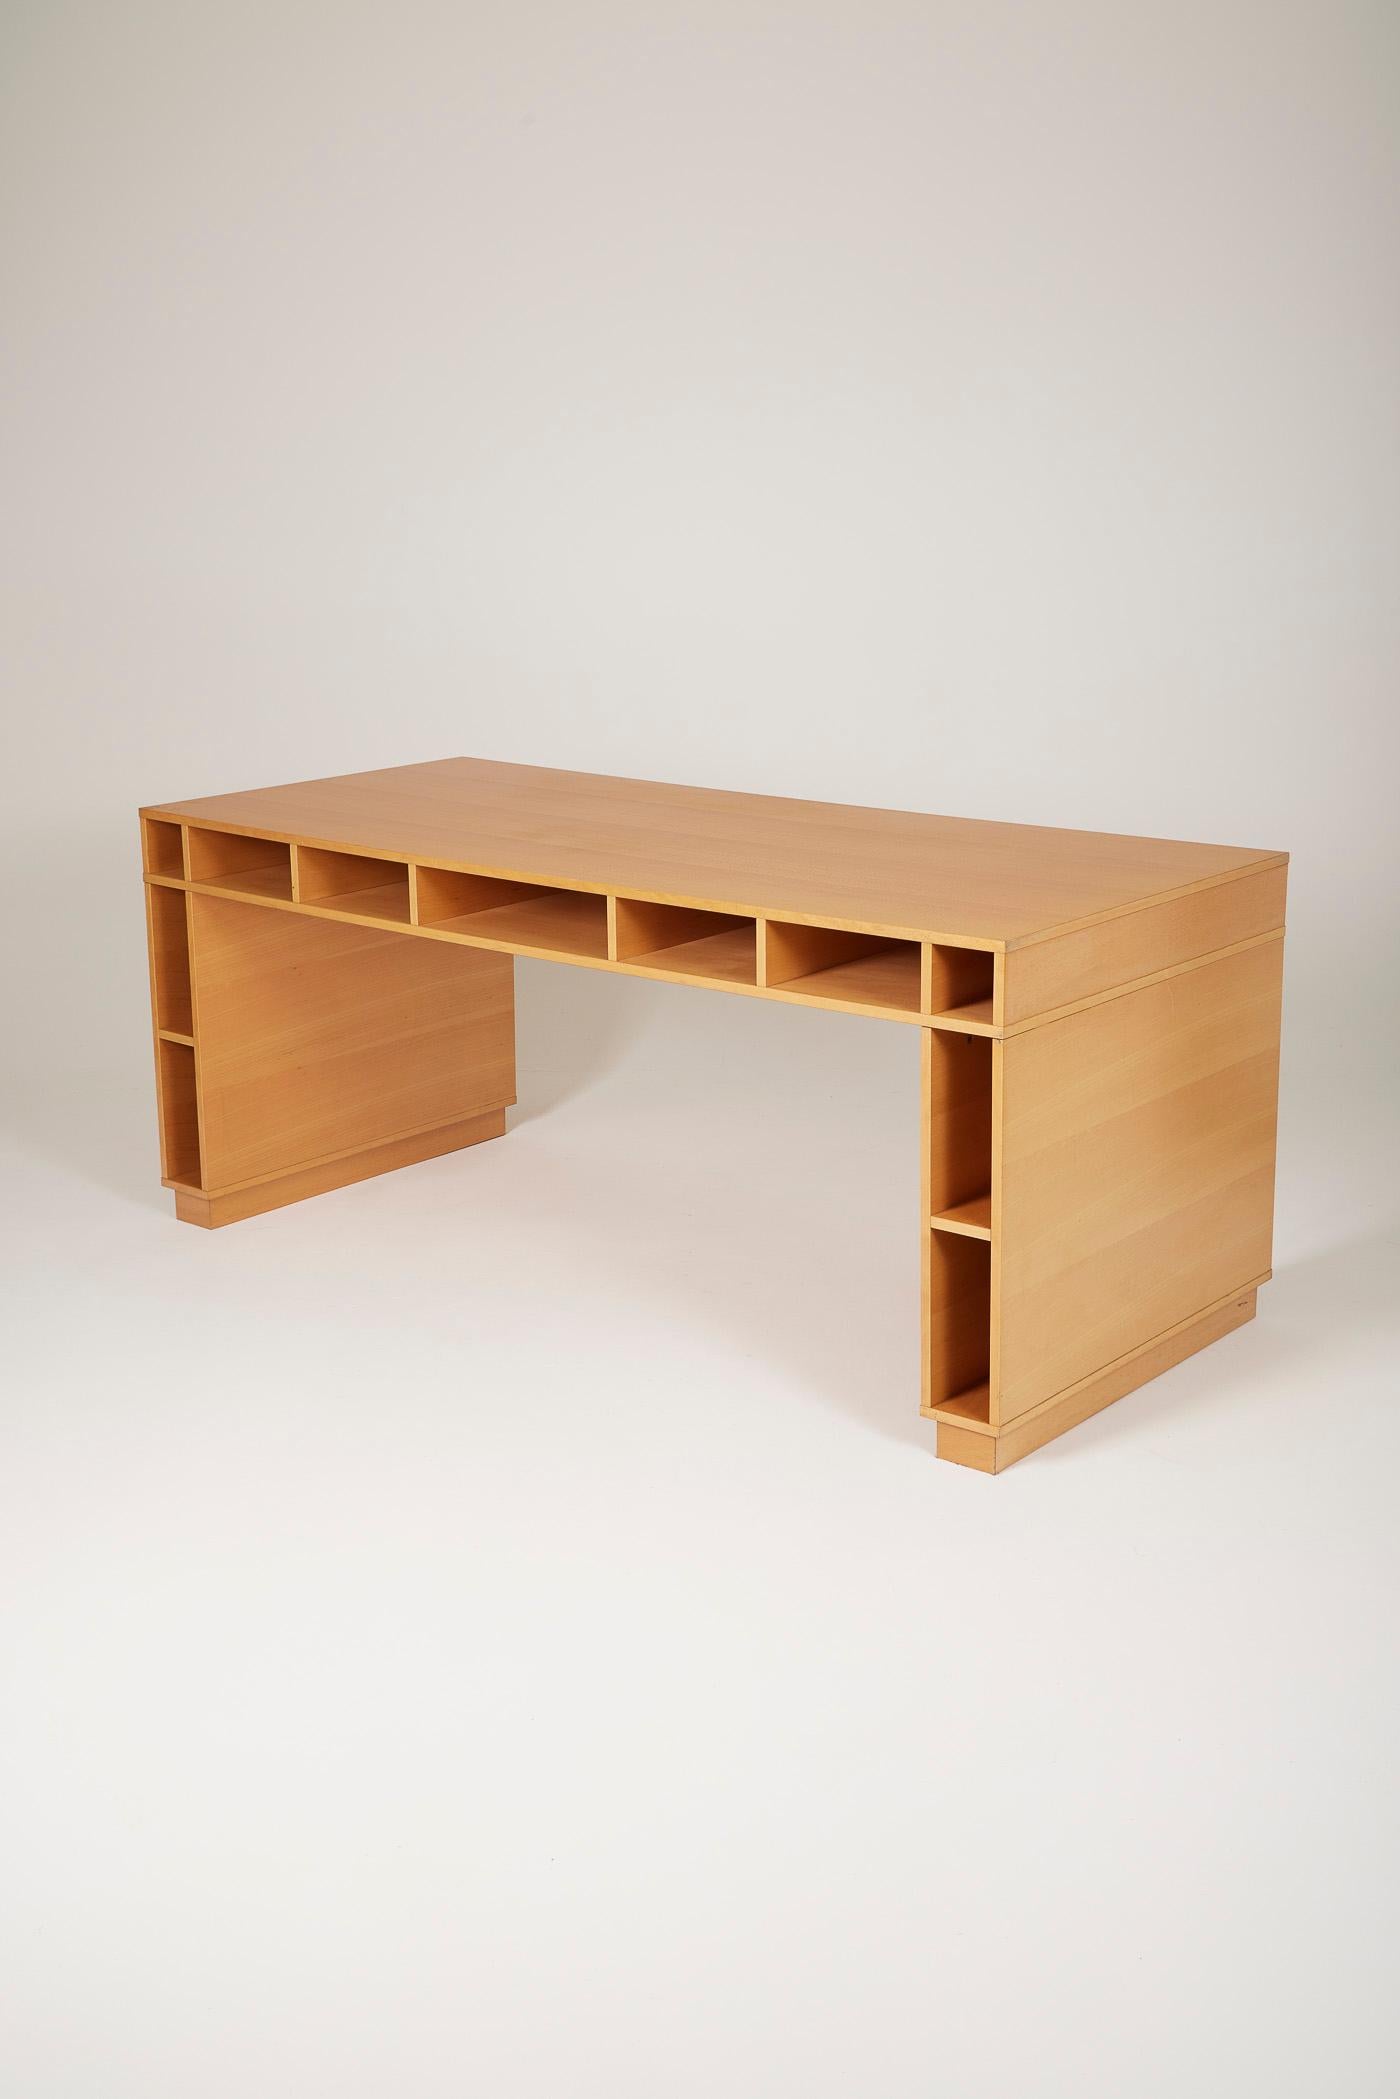 Large varnished wood desk by Spanish designer Ricardo Bofill for Habitat, 1980s. The desk features numerous storage compartments throughout the structure. Very good condition.
LP2034